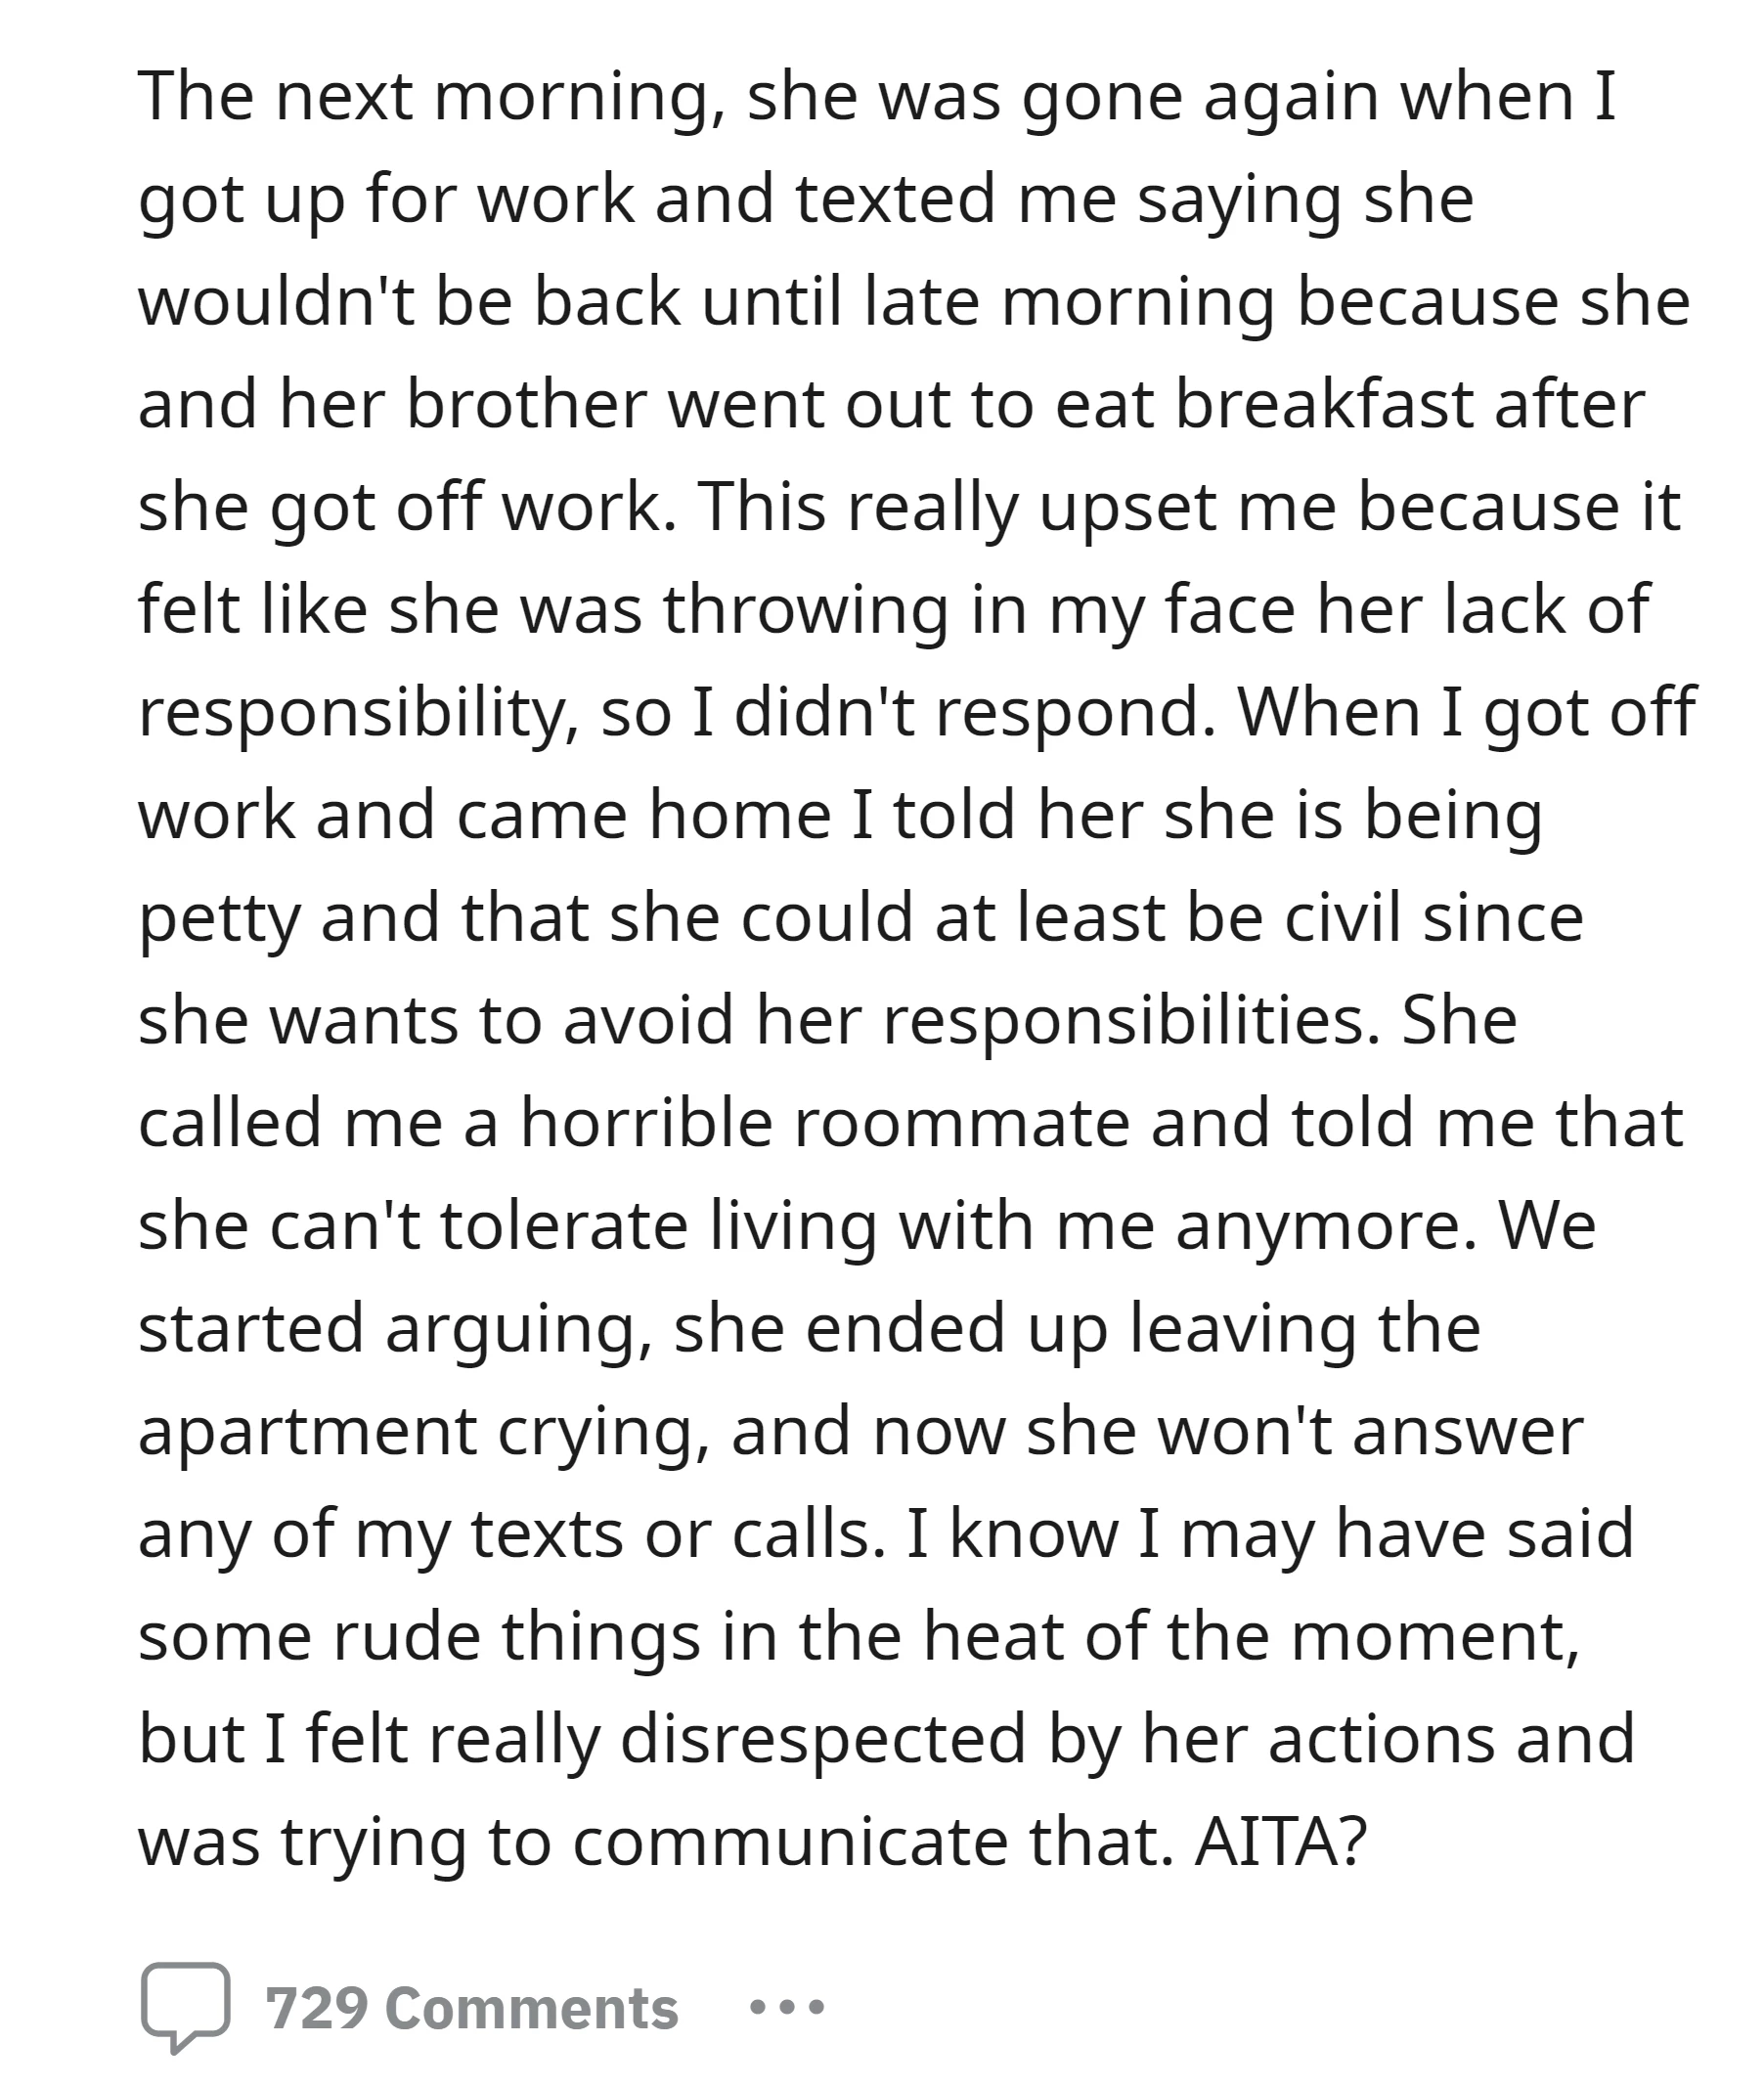 The OP confronted her roommate for being irresponsible, and the roommate left and didn't respond to any text or calls